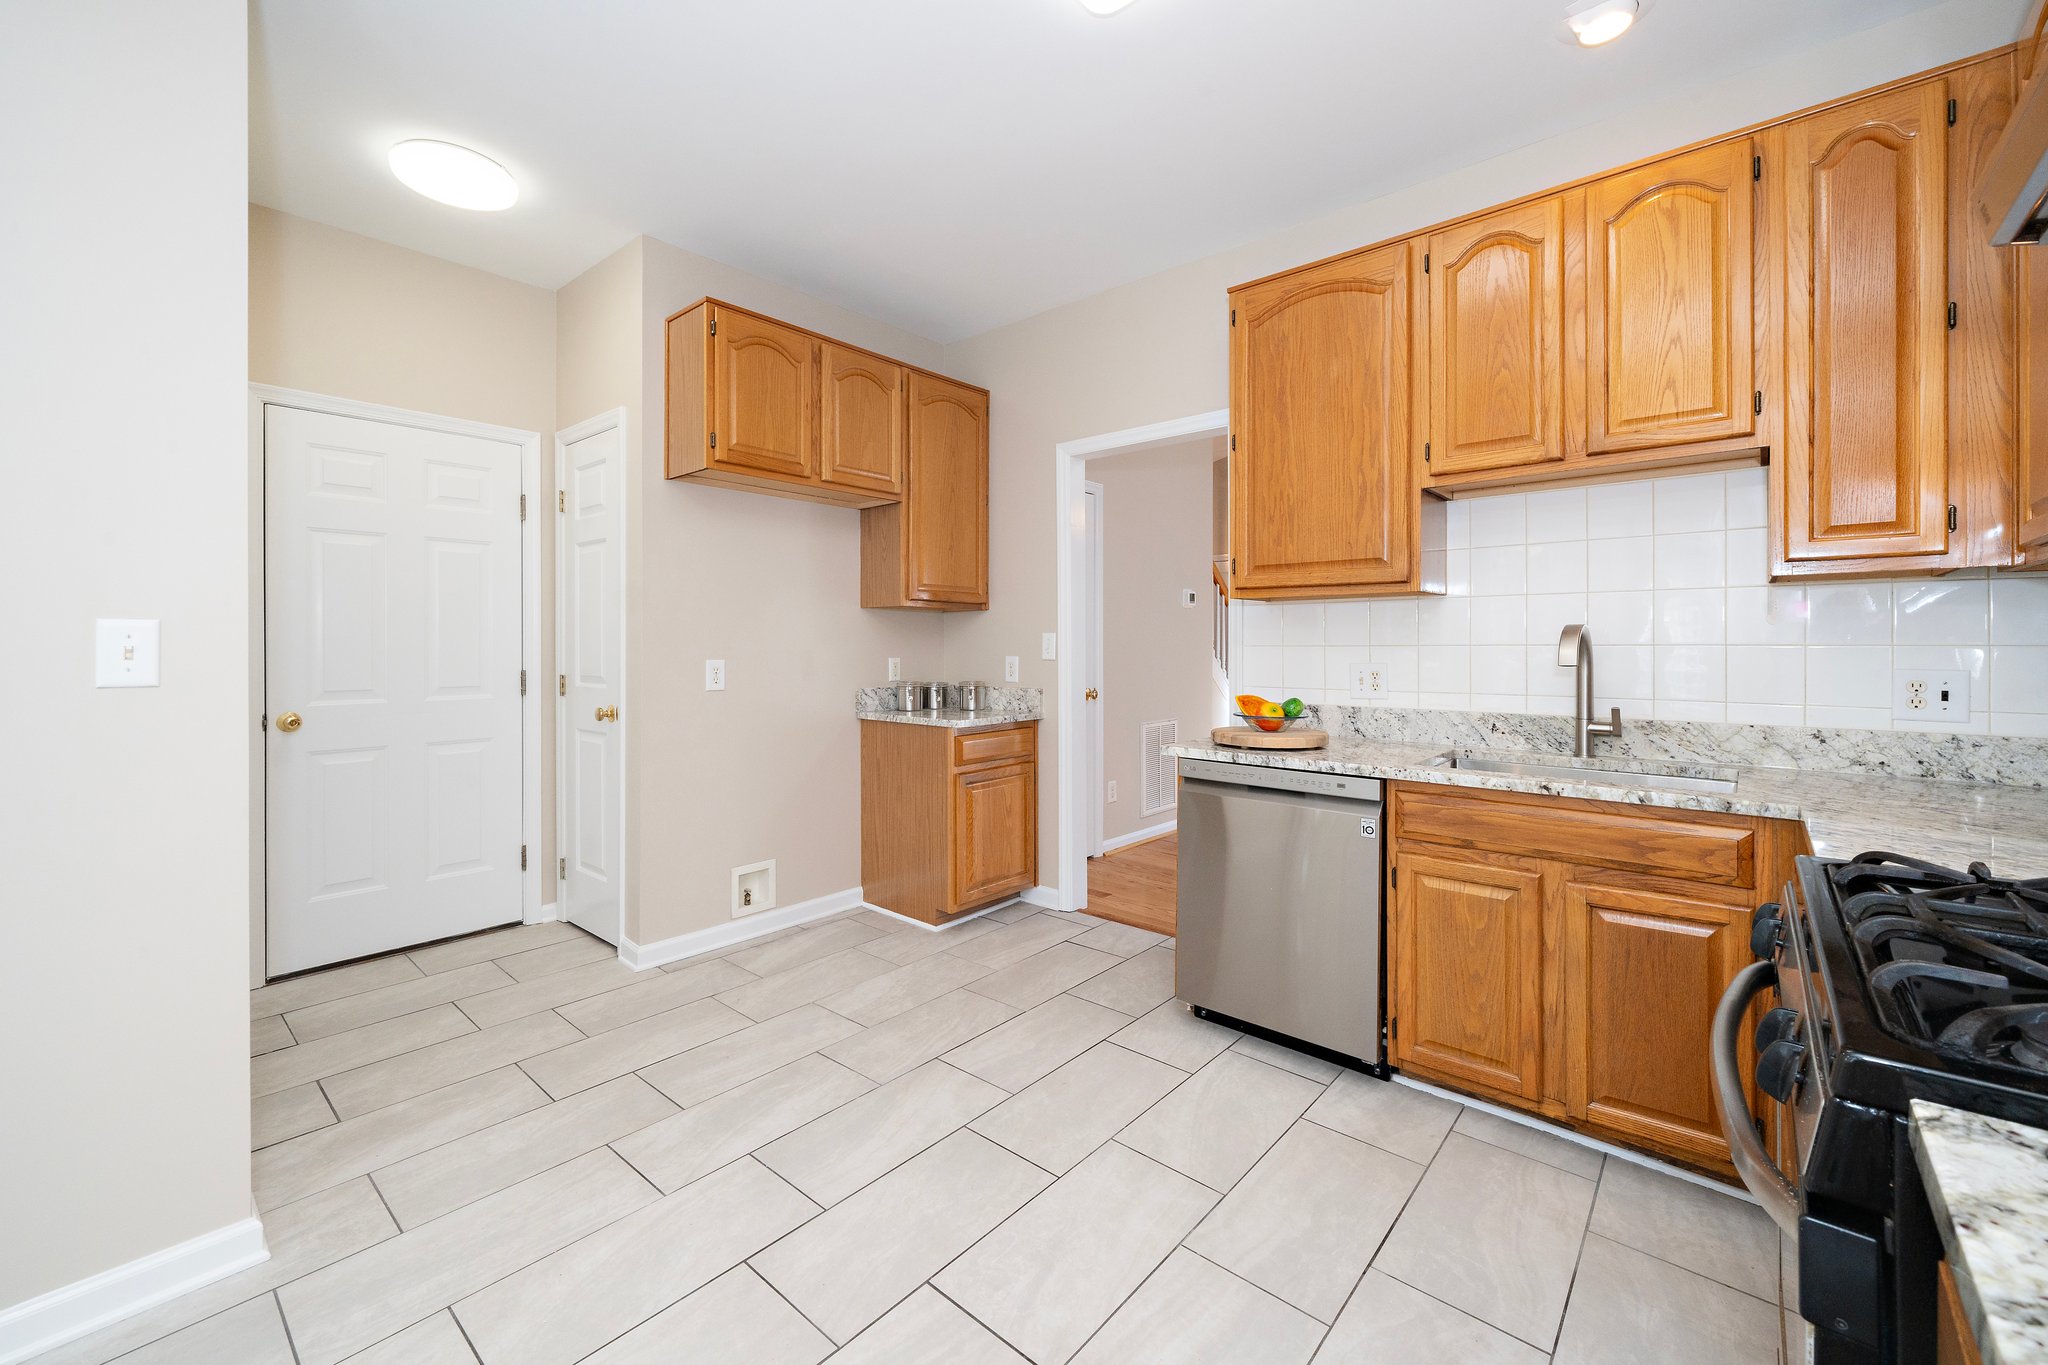 The Kitchen features new granite counters, a new stainless sink and faucet . . .